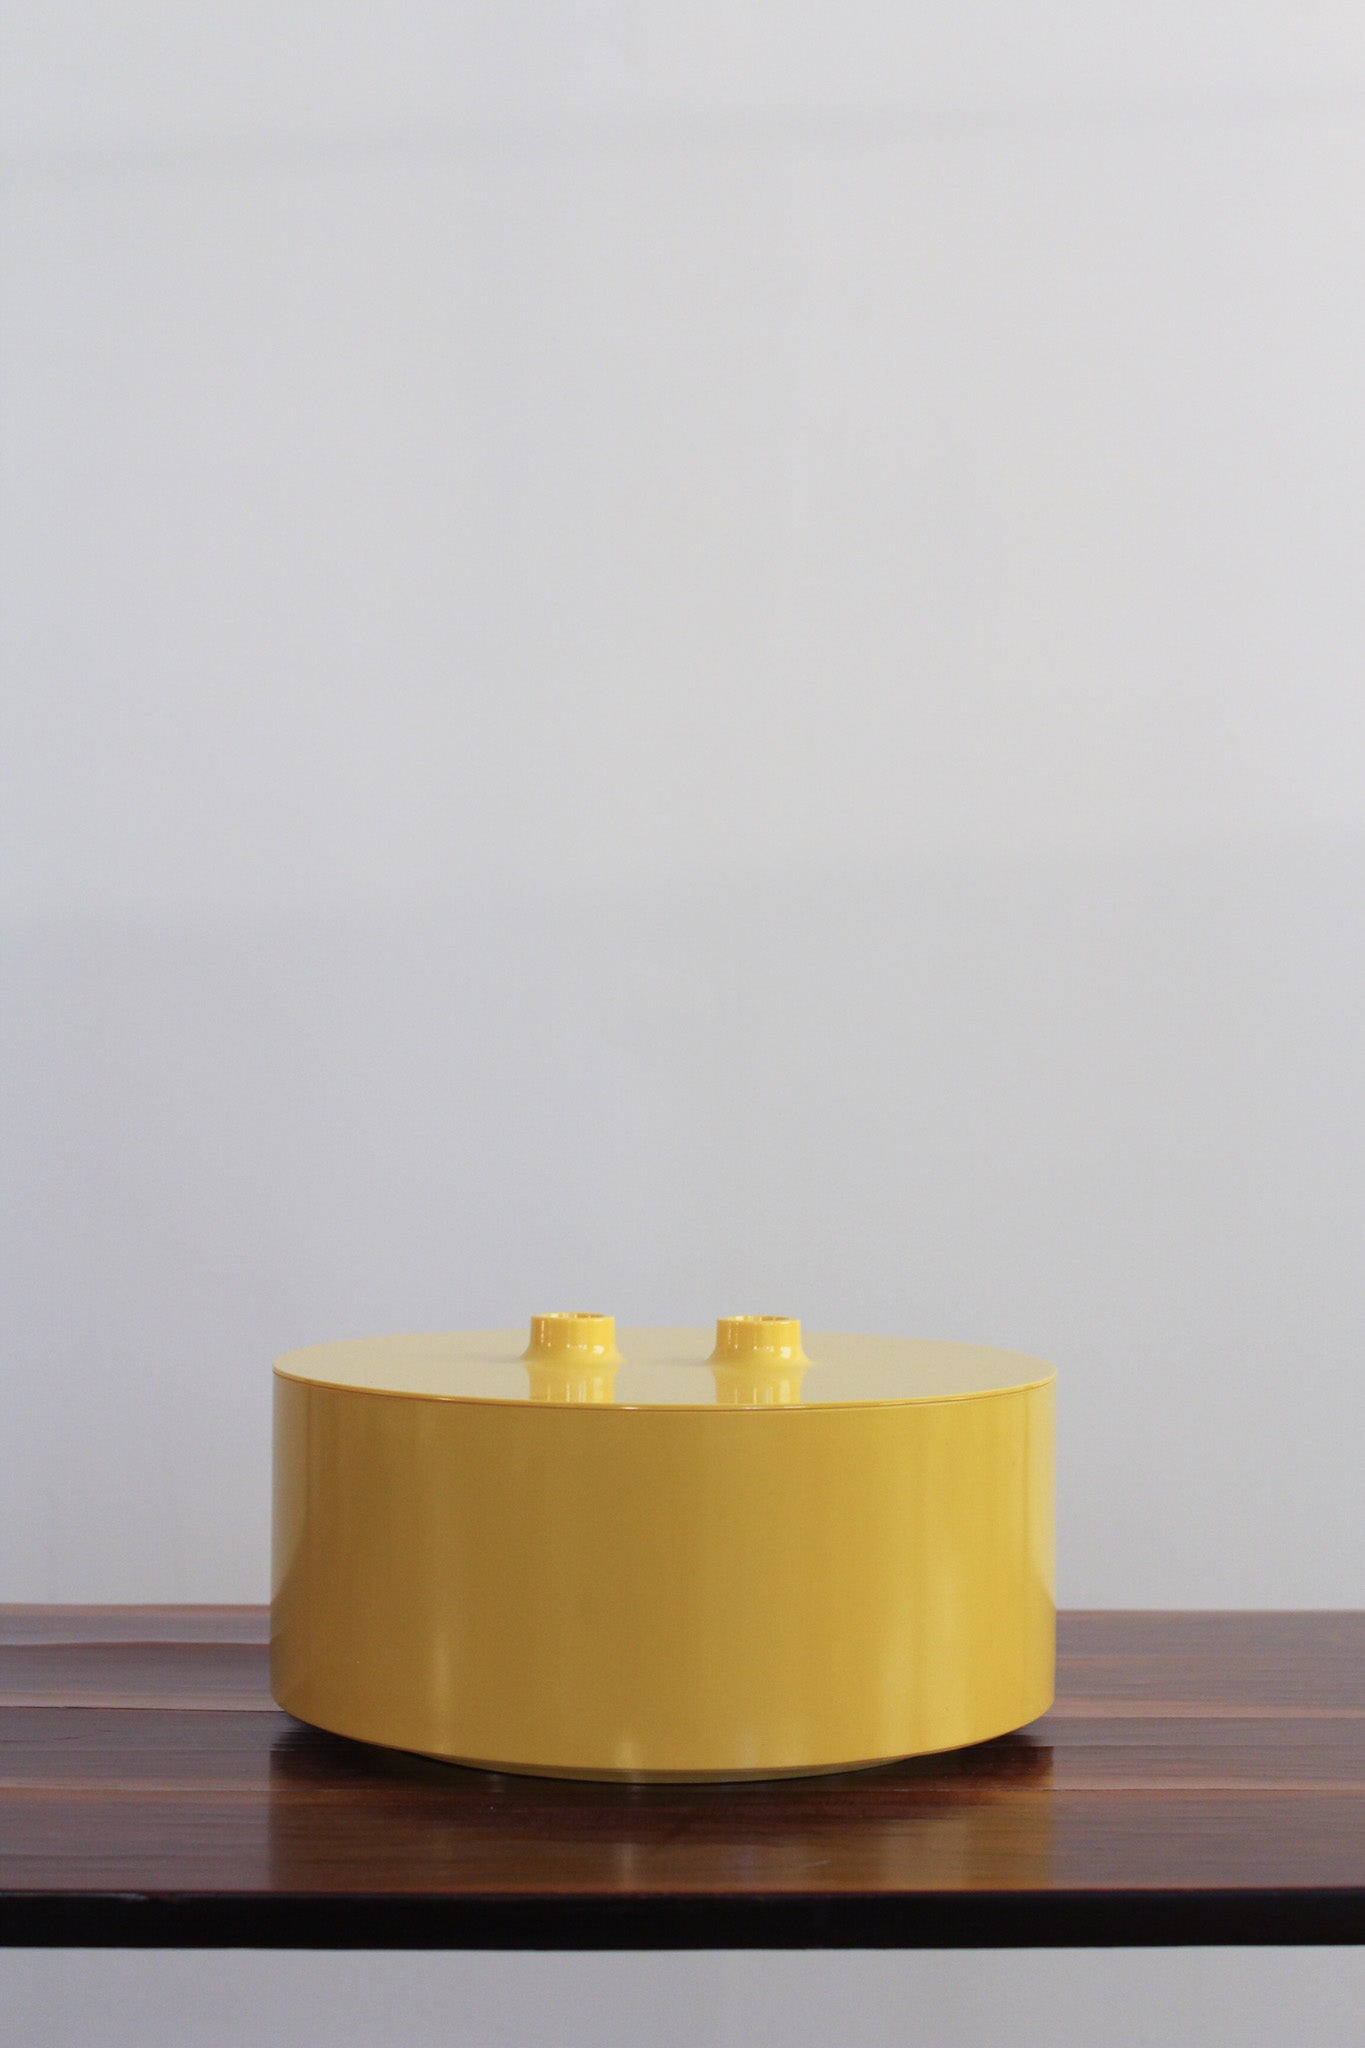 Yellow Dinnerware by Vignelli for Heller